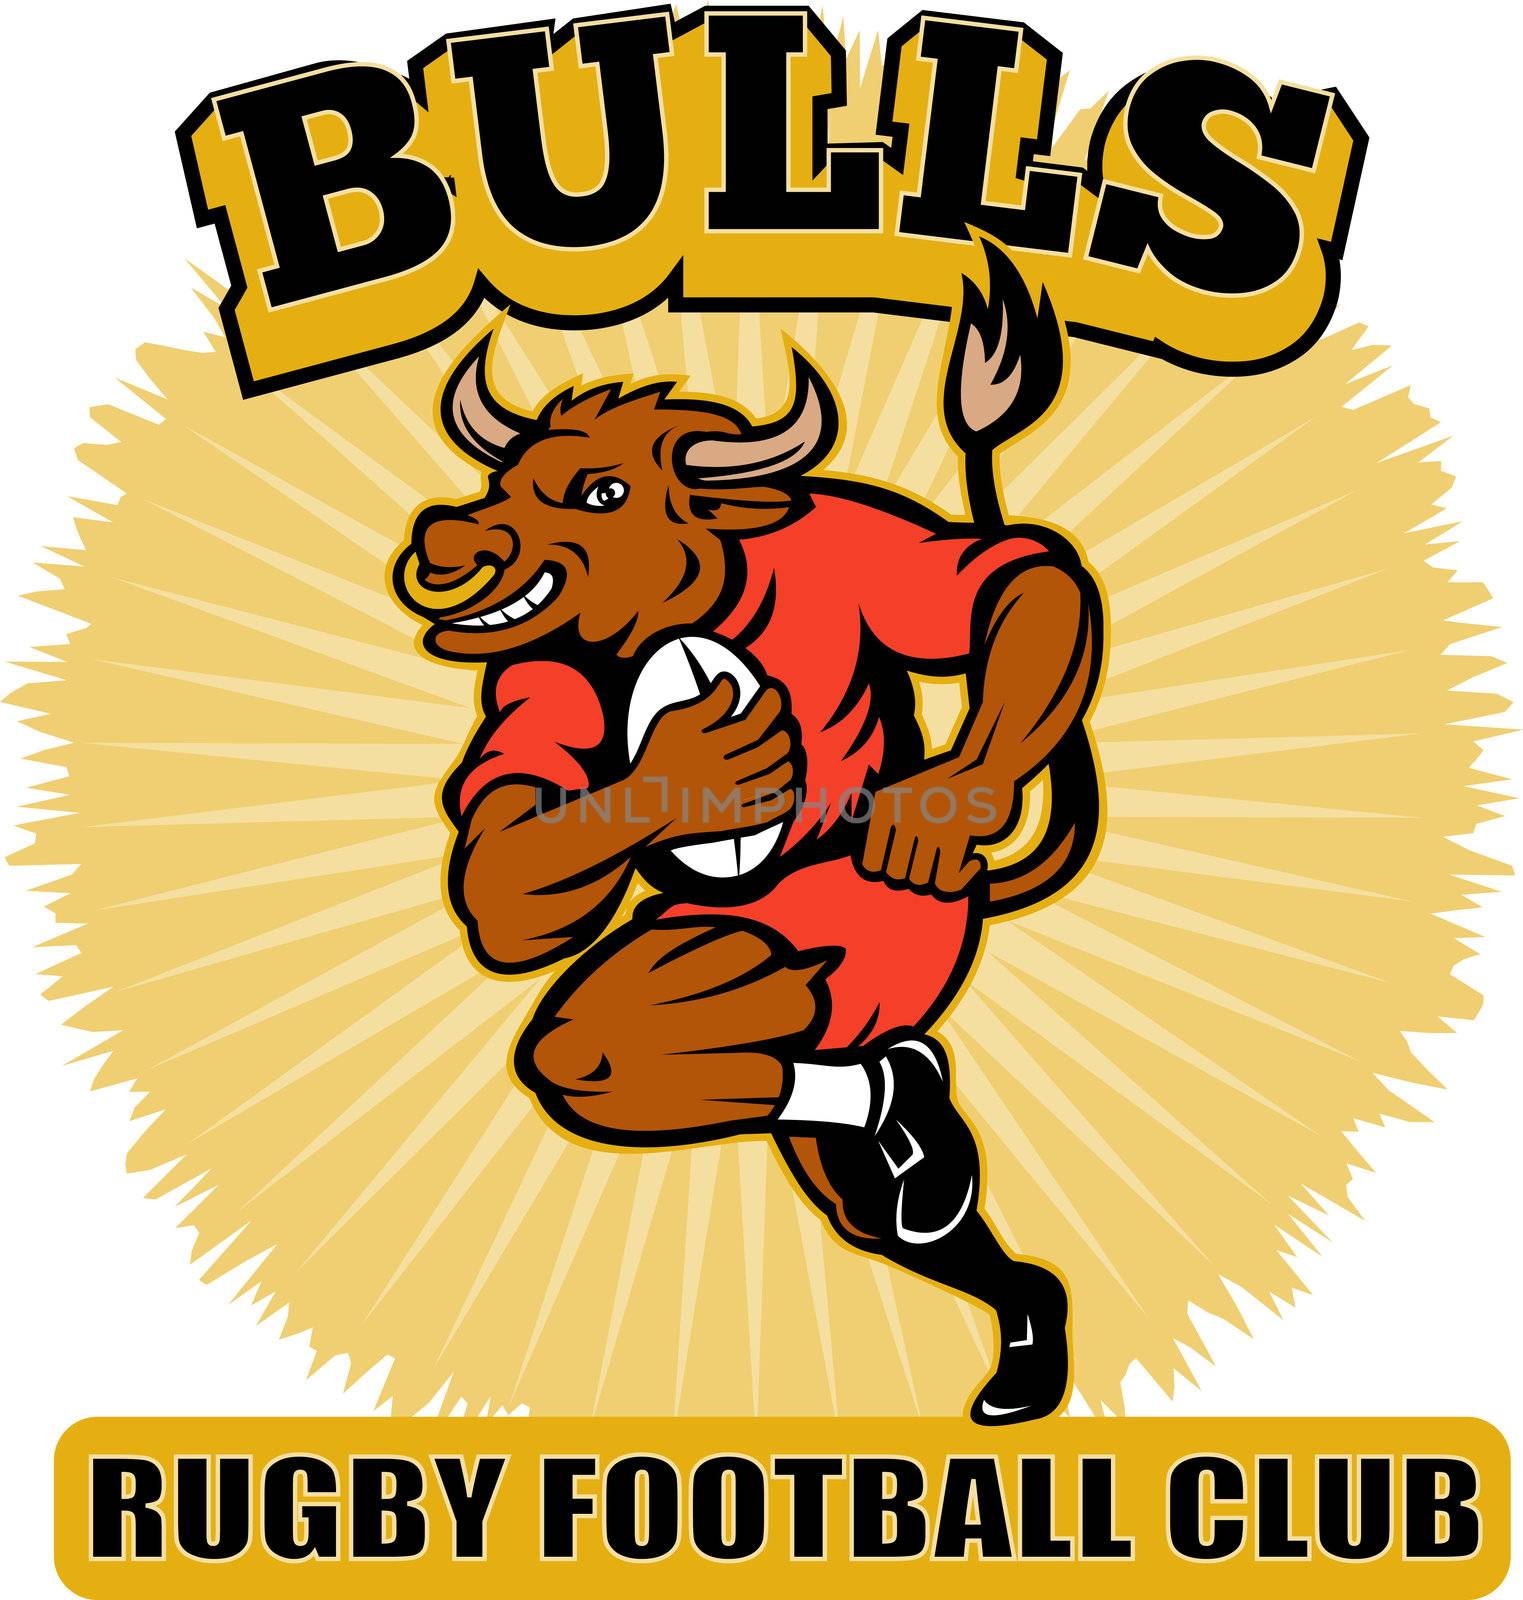 Bull playing rugby running with ball by patrimonio